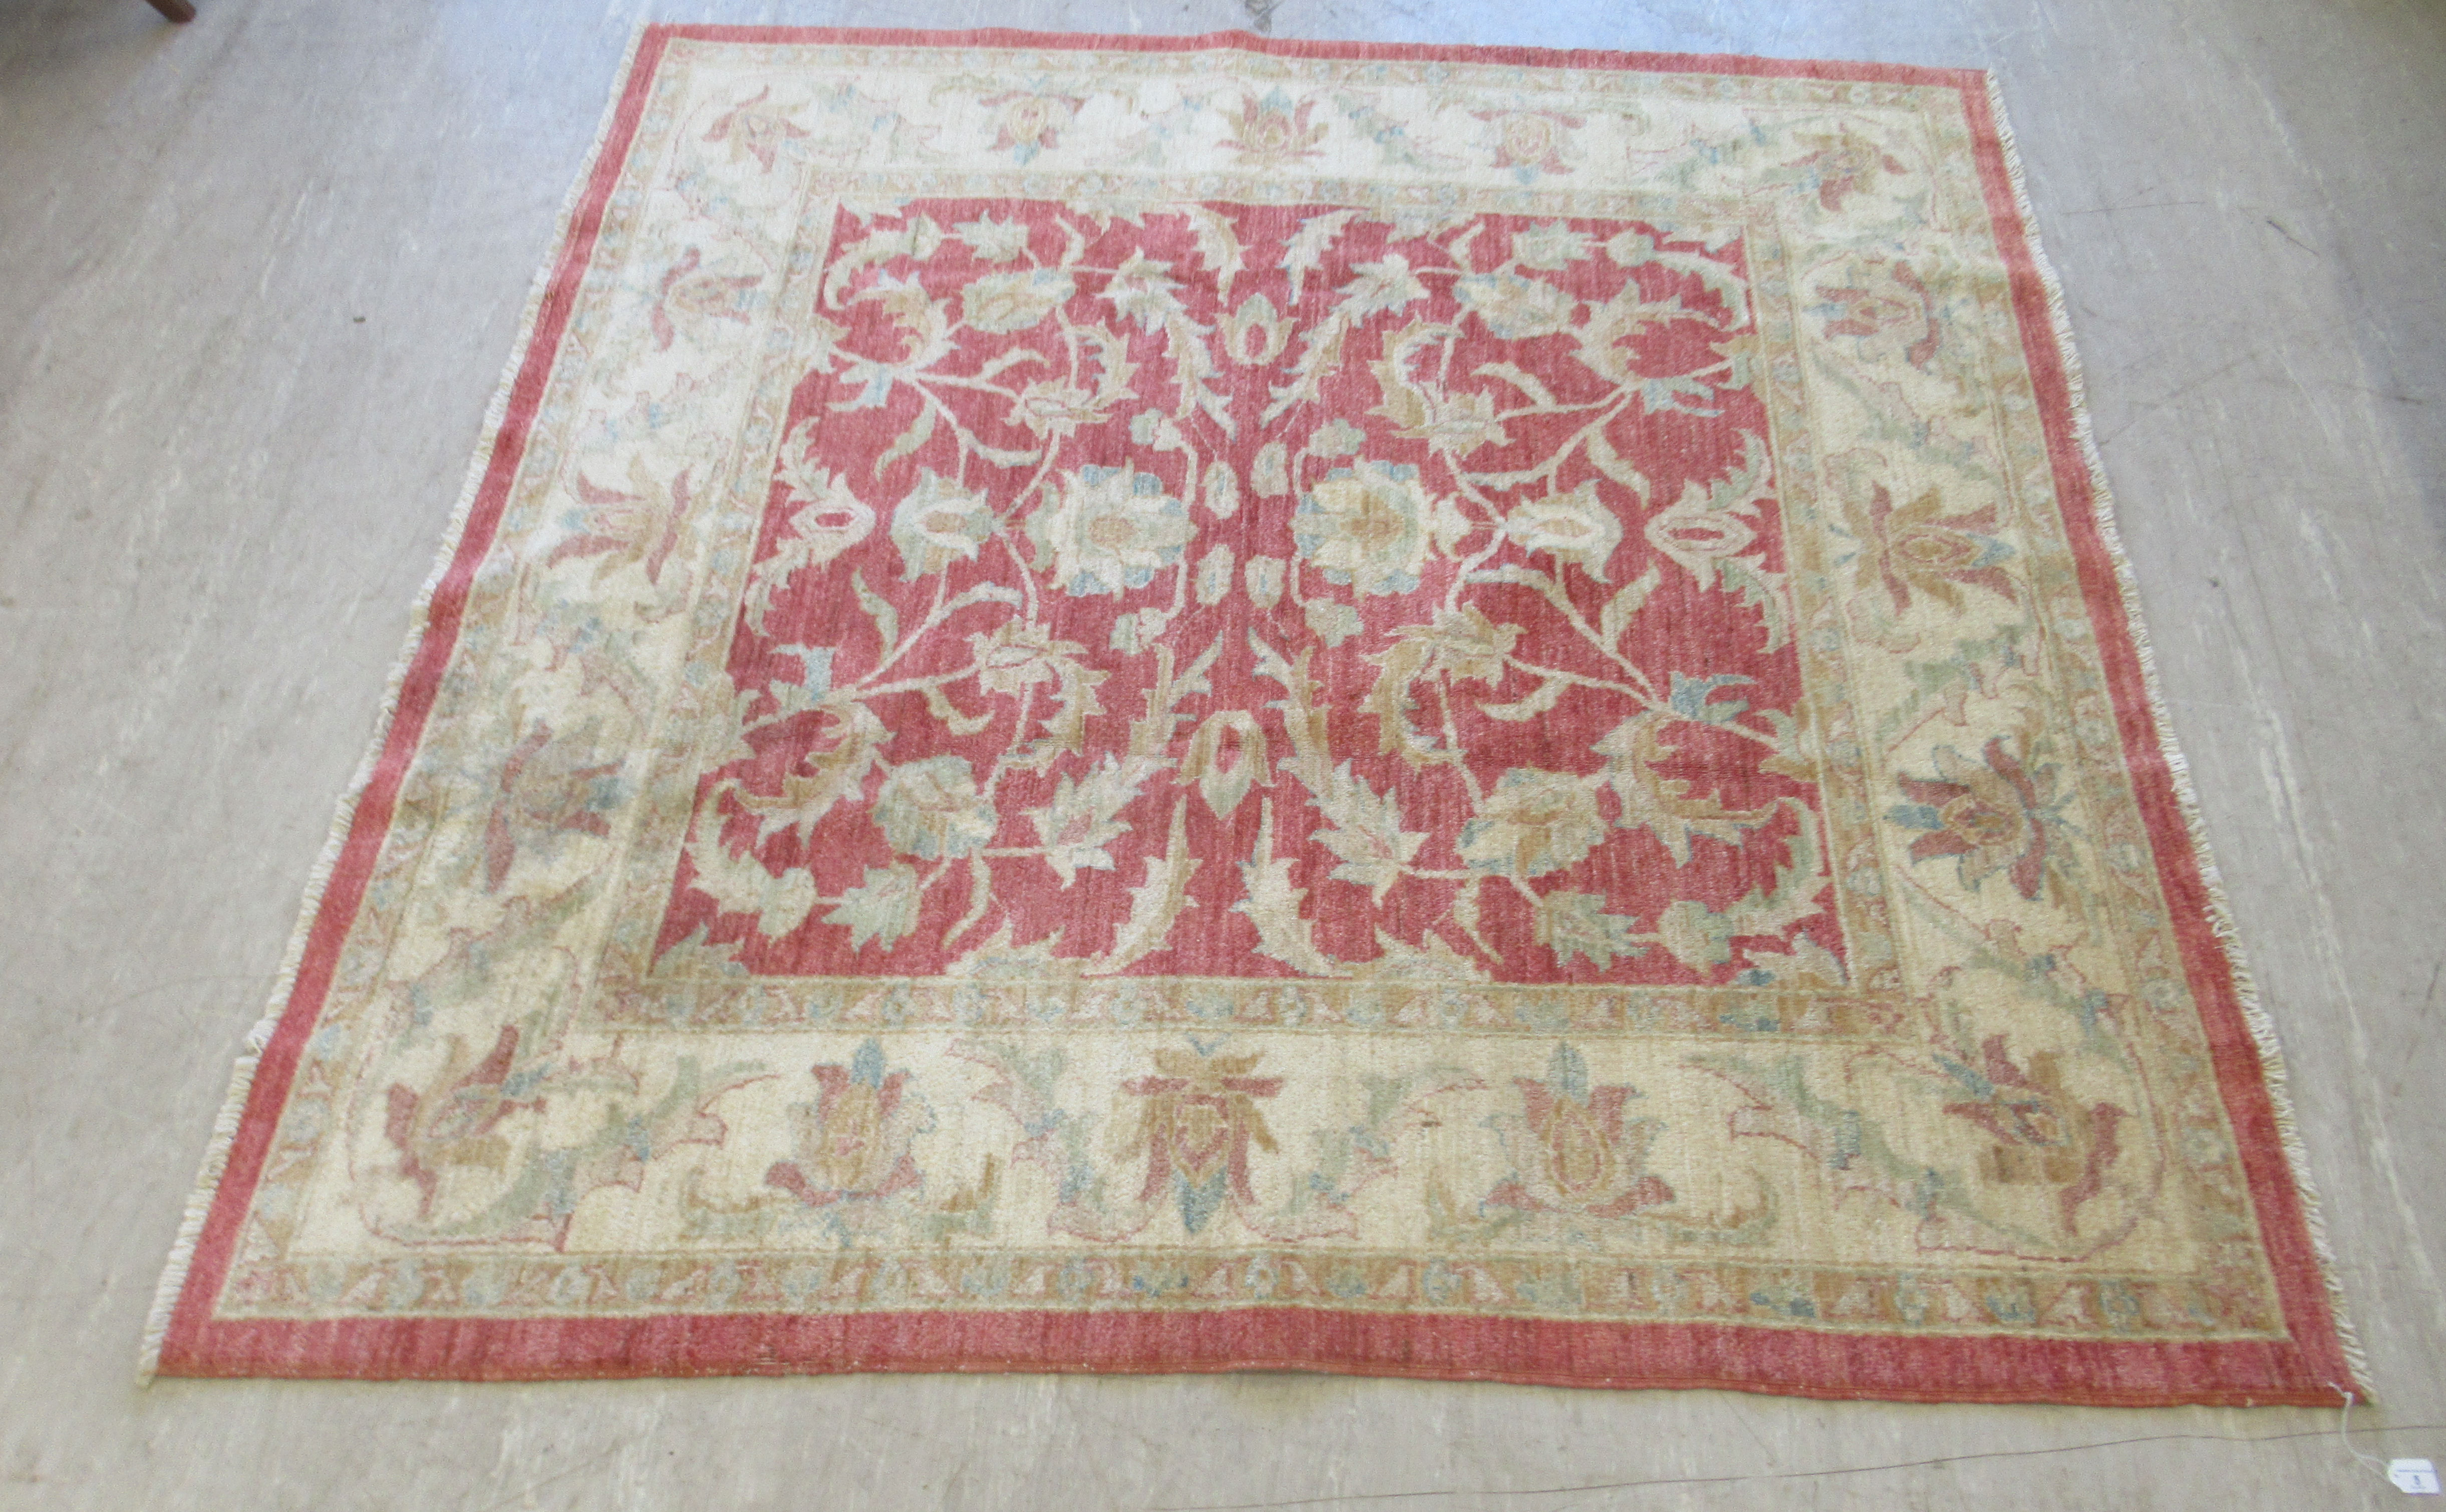 A Ziegler rug, decorated with foliate designs, on a red and cream coloured ground  79" x 78"